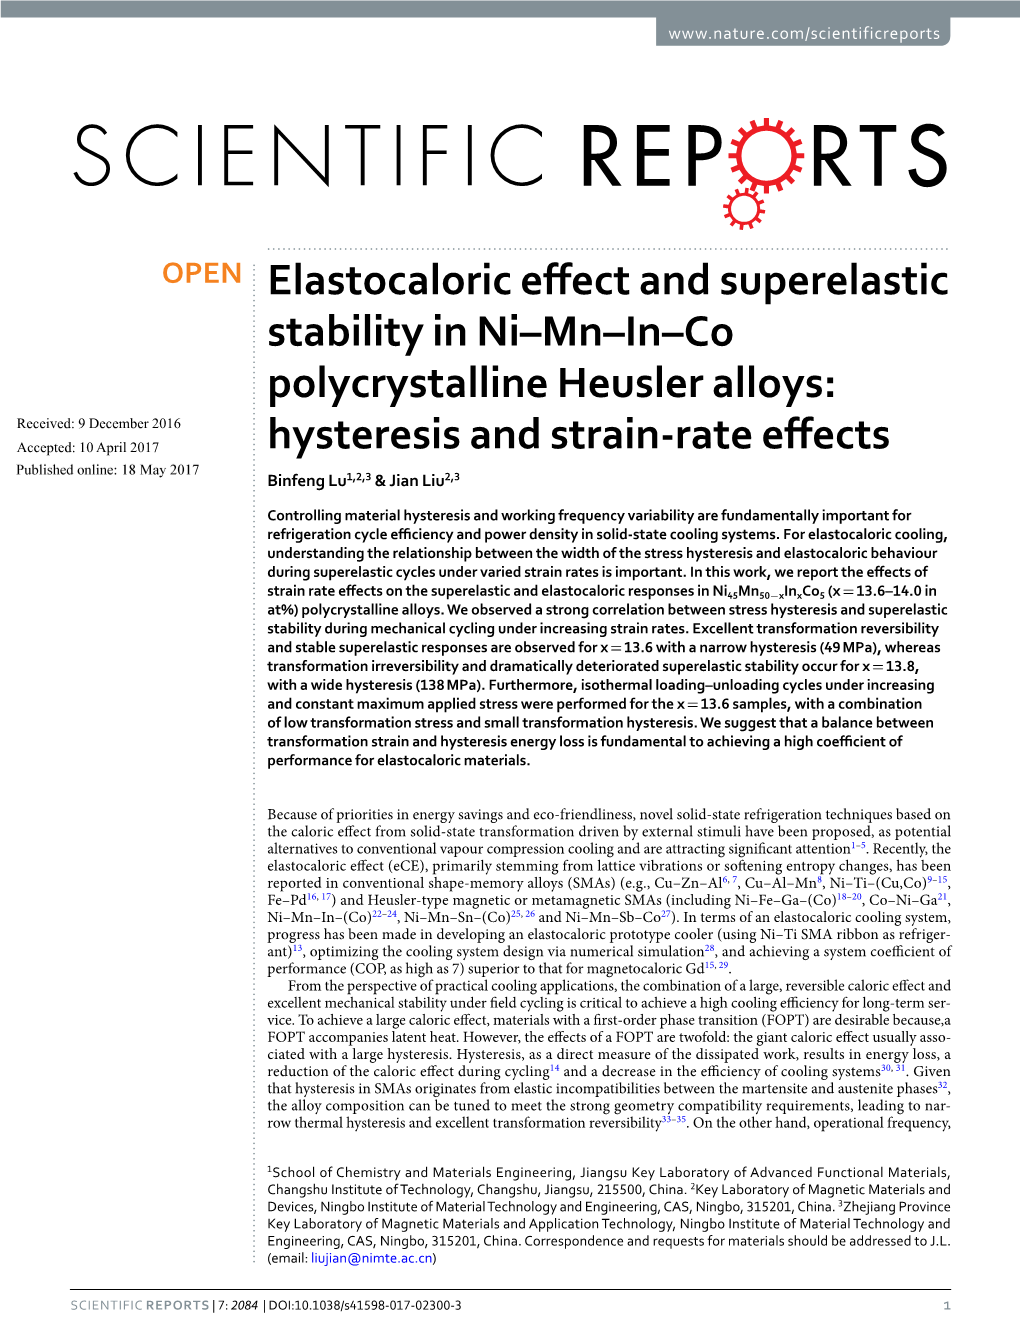 Elastocaloric Effect and Superelastic Stability in Ni–Mn–In–Co